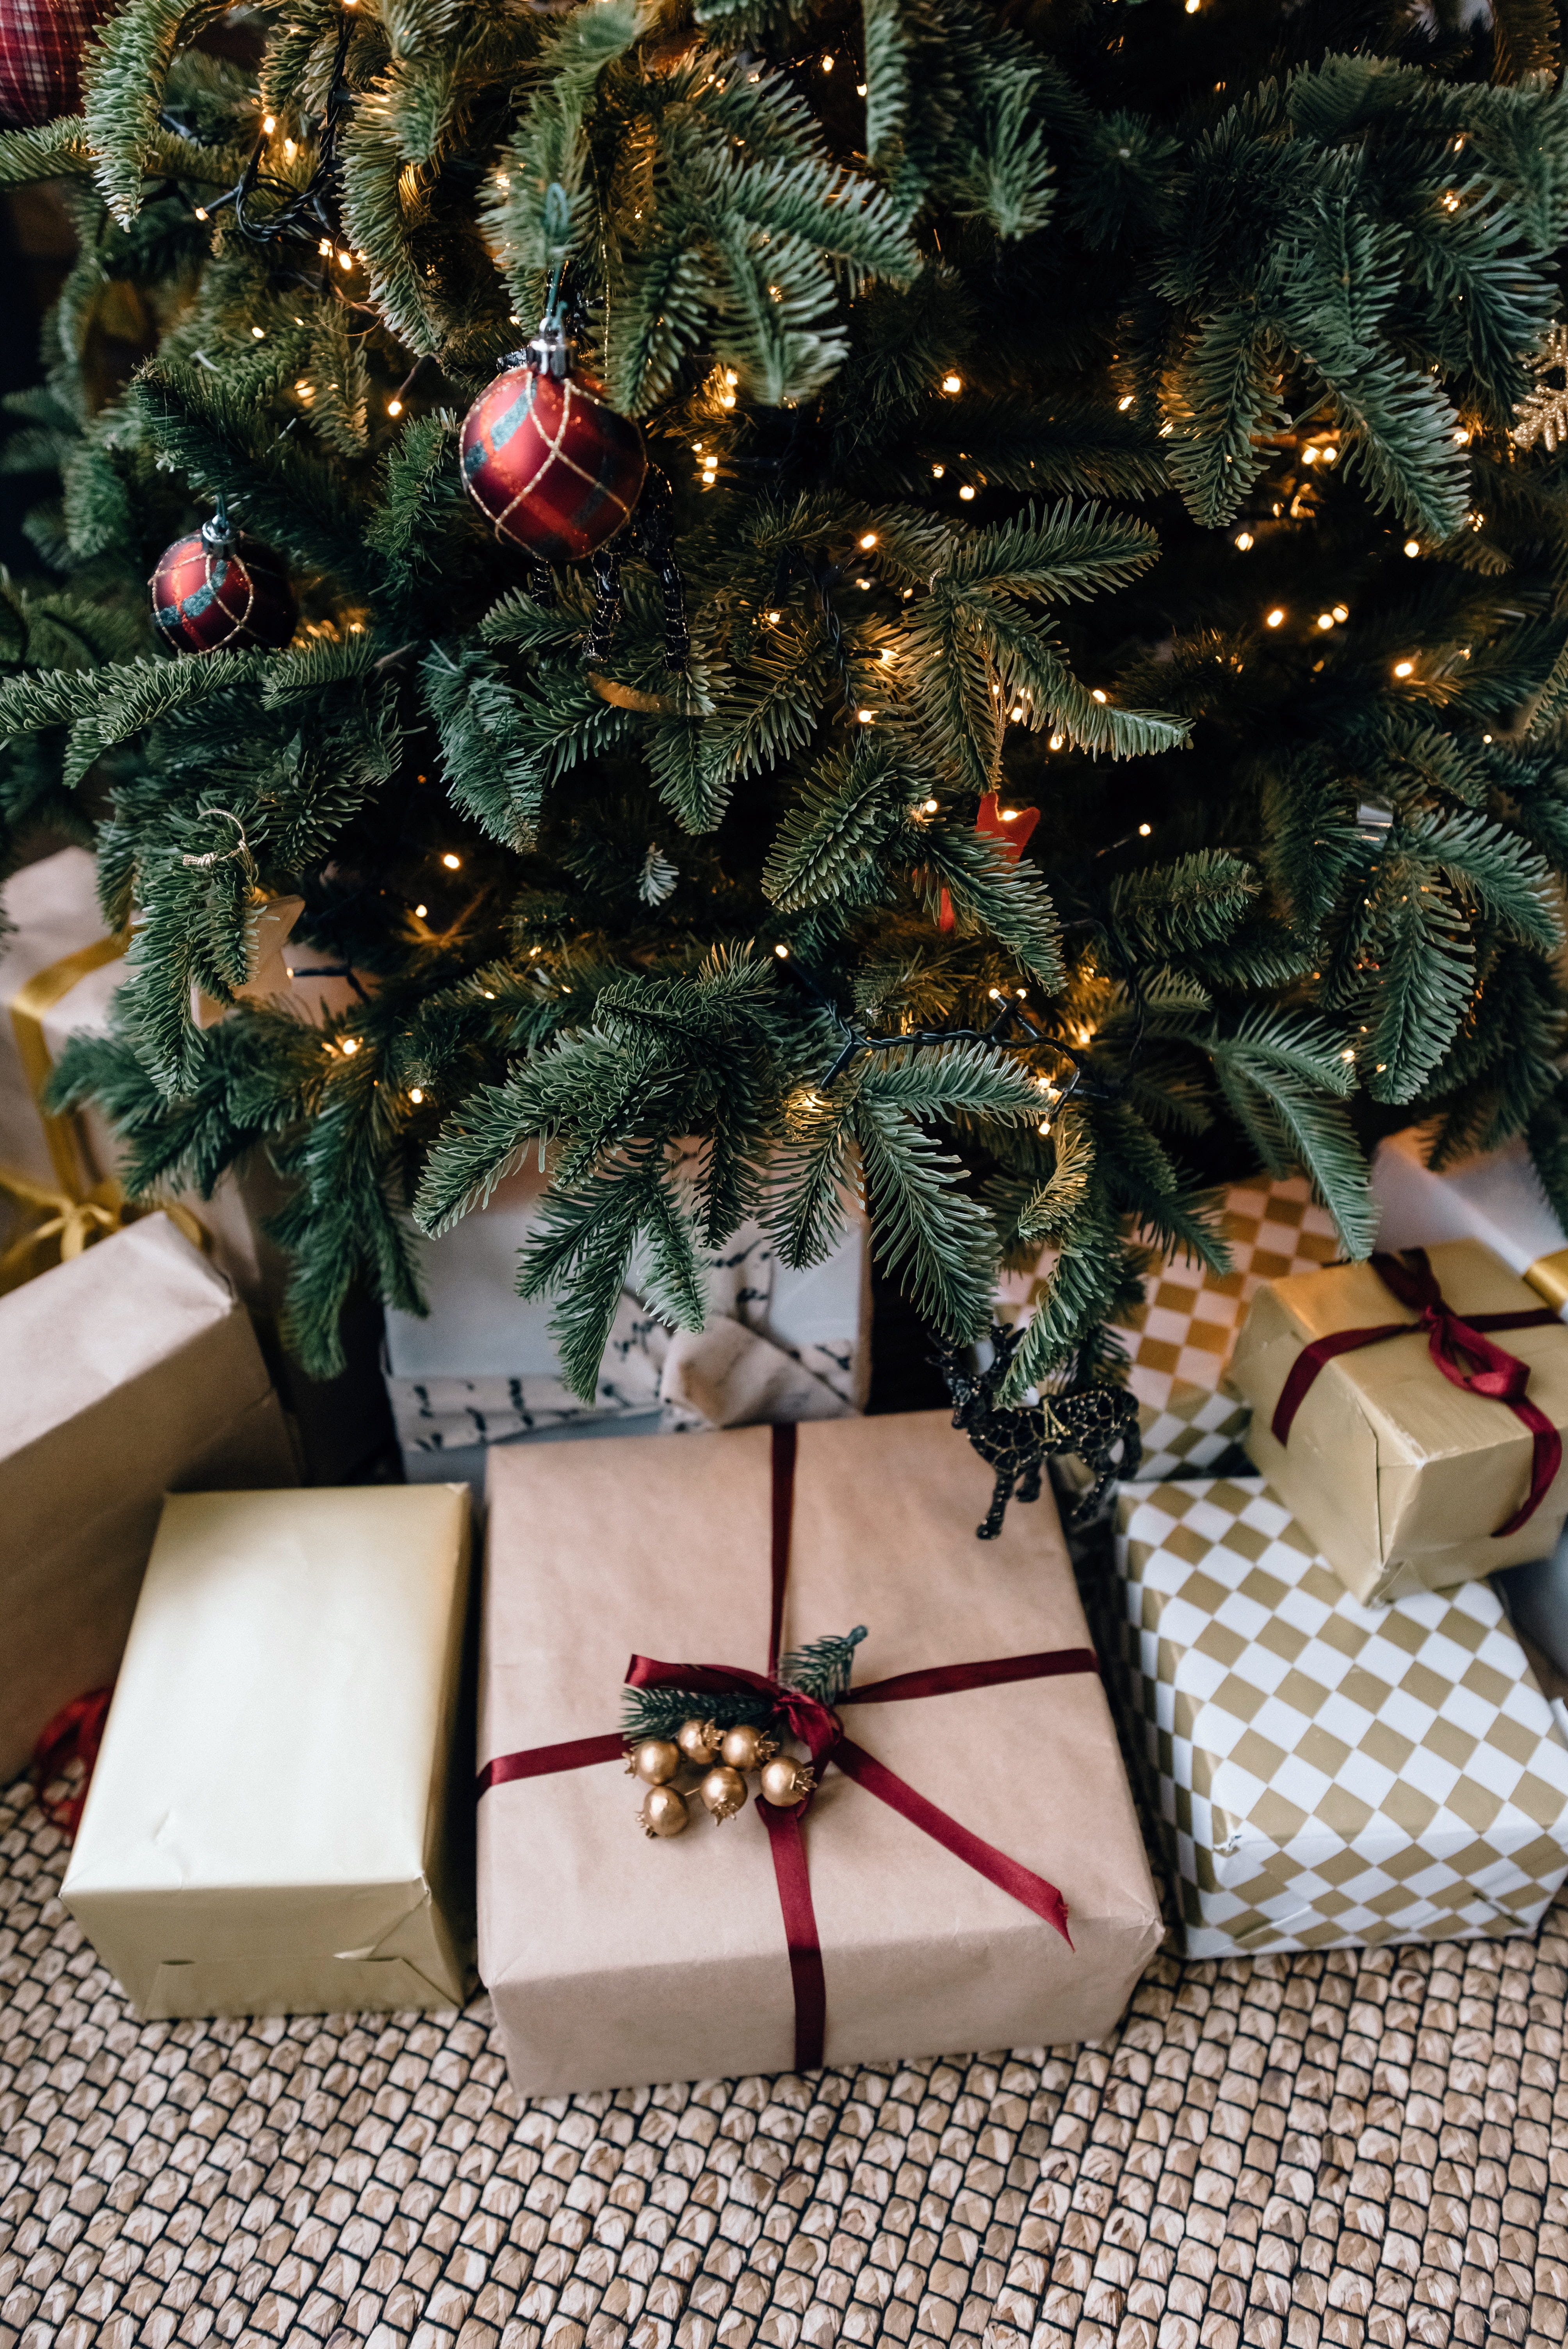 Close up of presents under a tree, wrapped in brown paper.